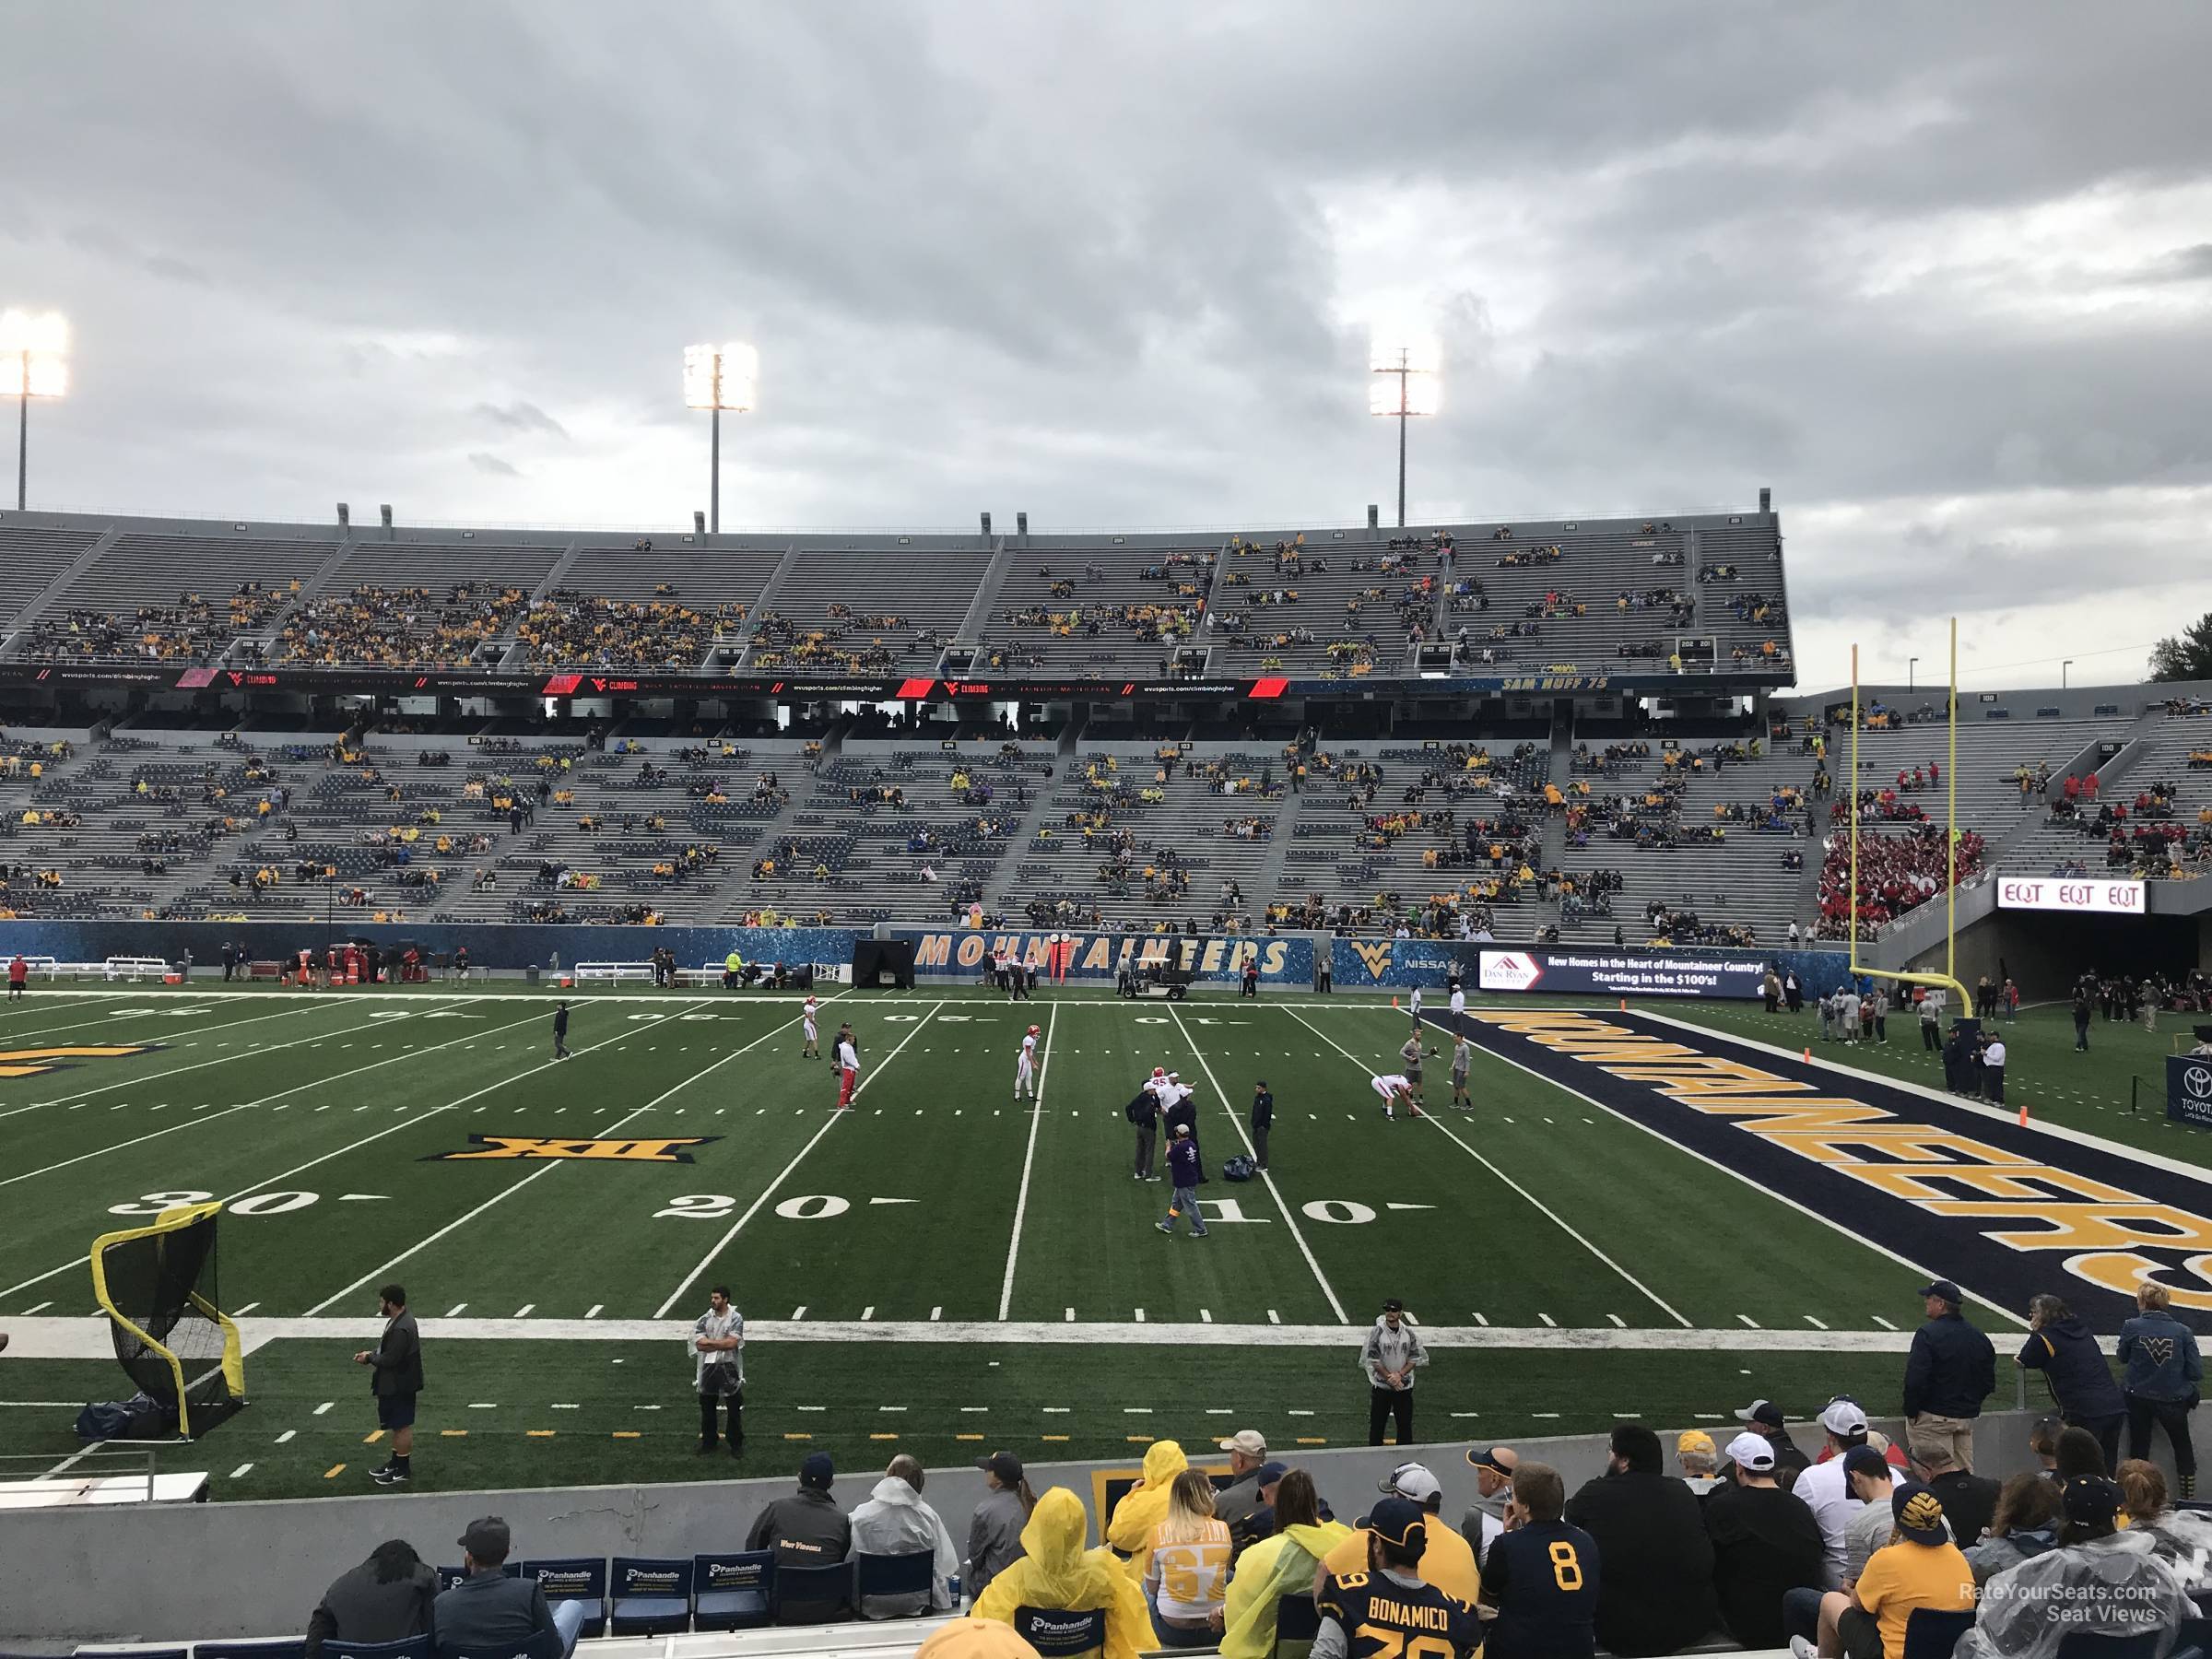 section 128, row 15 seat view  - mountaineer field